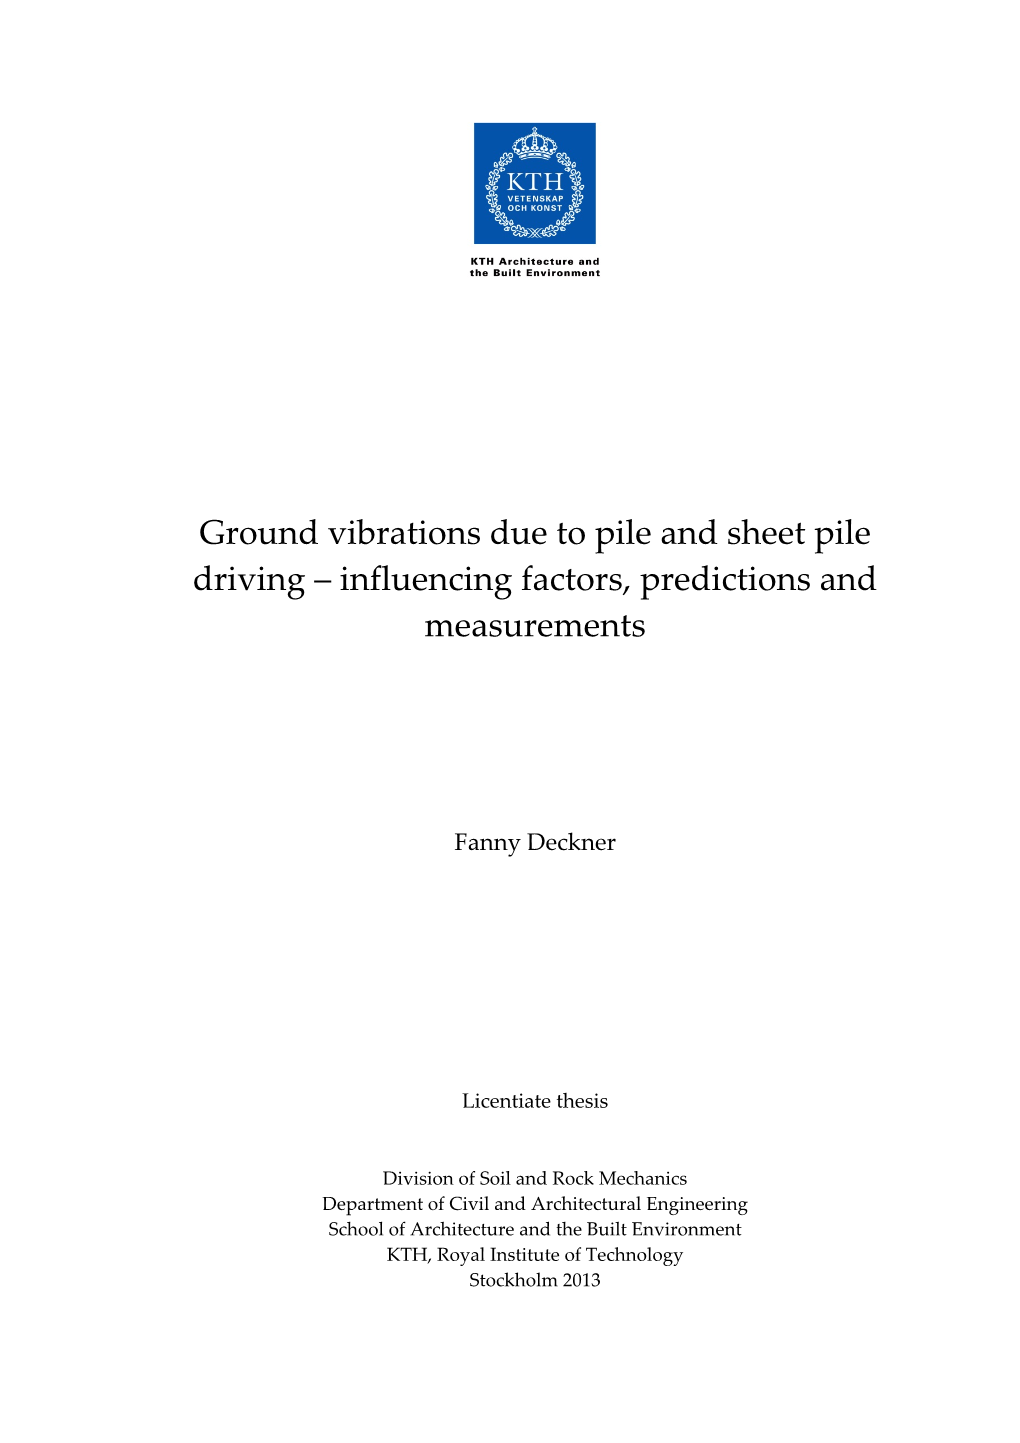 Ground Vibrations Due to Pile and Sheet Pile Driving – Influencing Factors, Predictions and Measurements